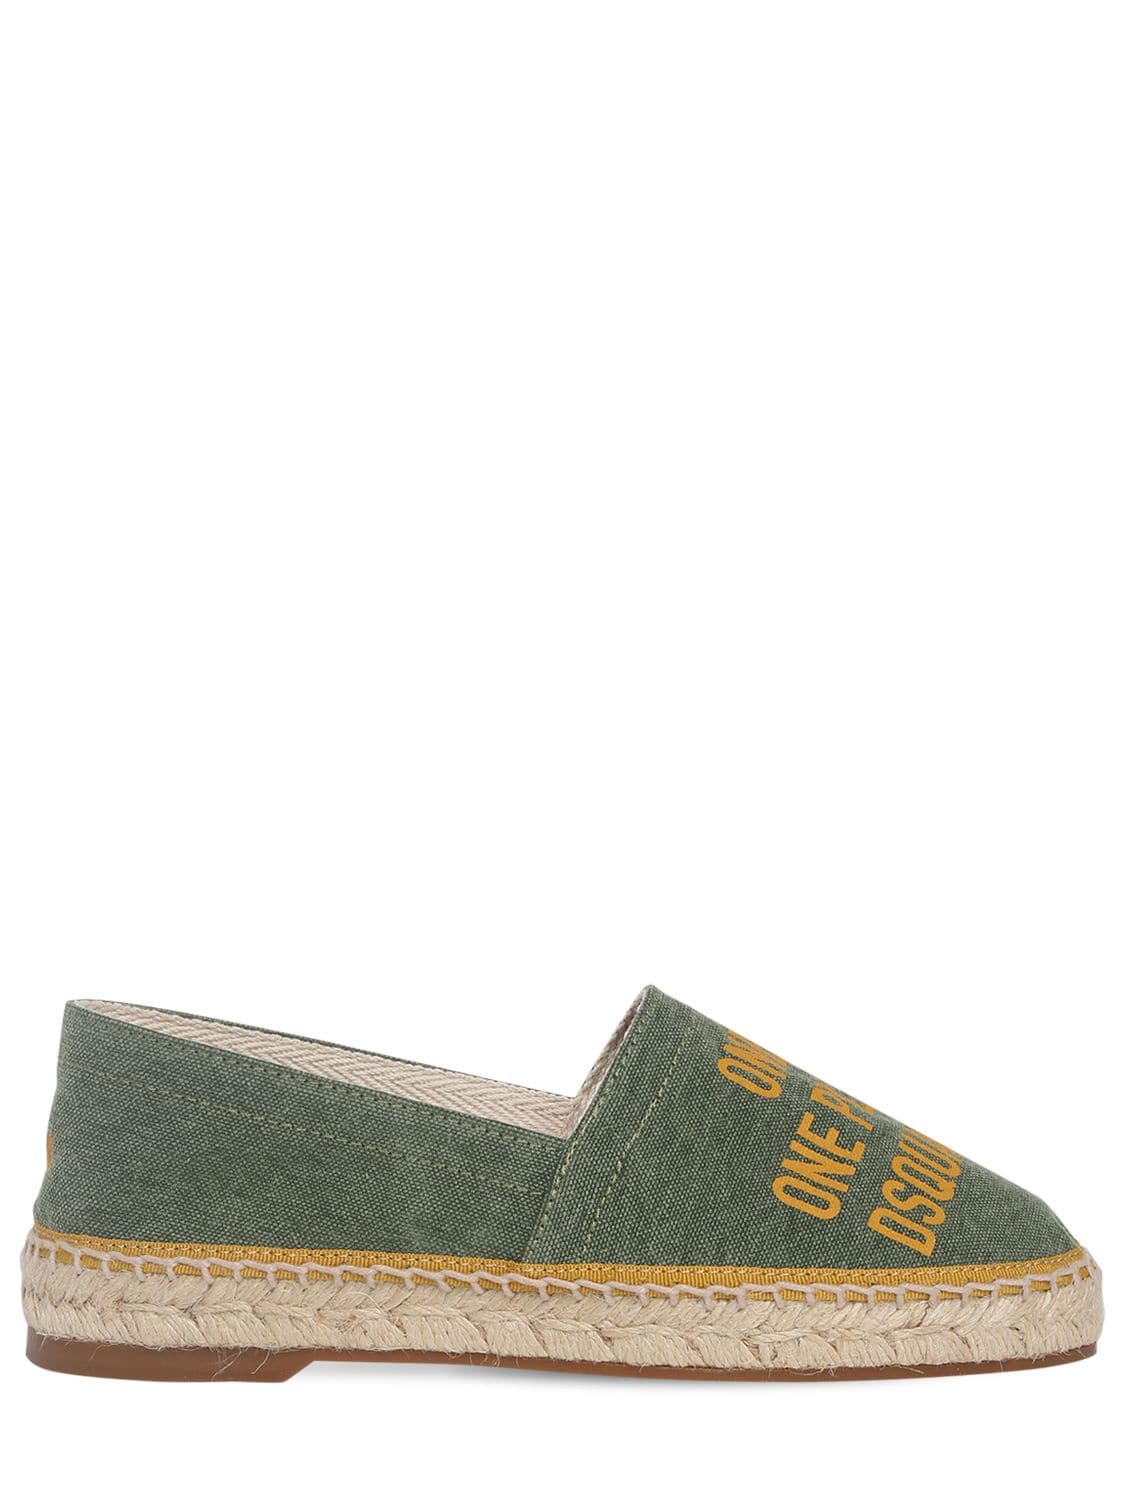 DSQUARED2 10MM ONE LIFE ONE PLANET ESPADRILLES